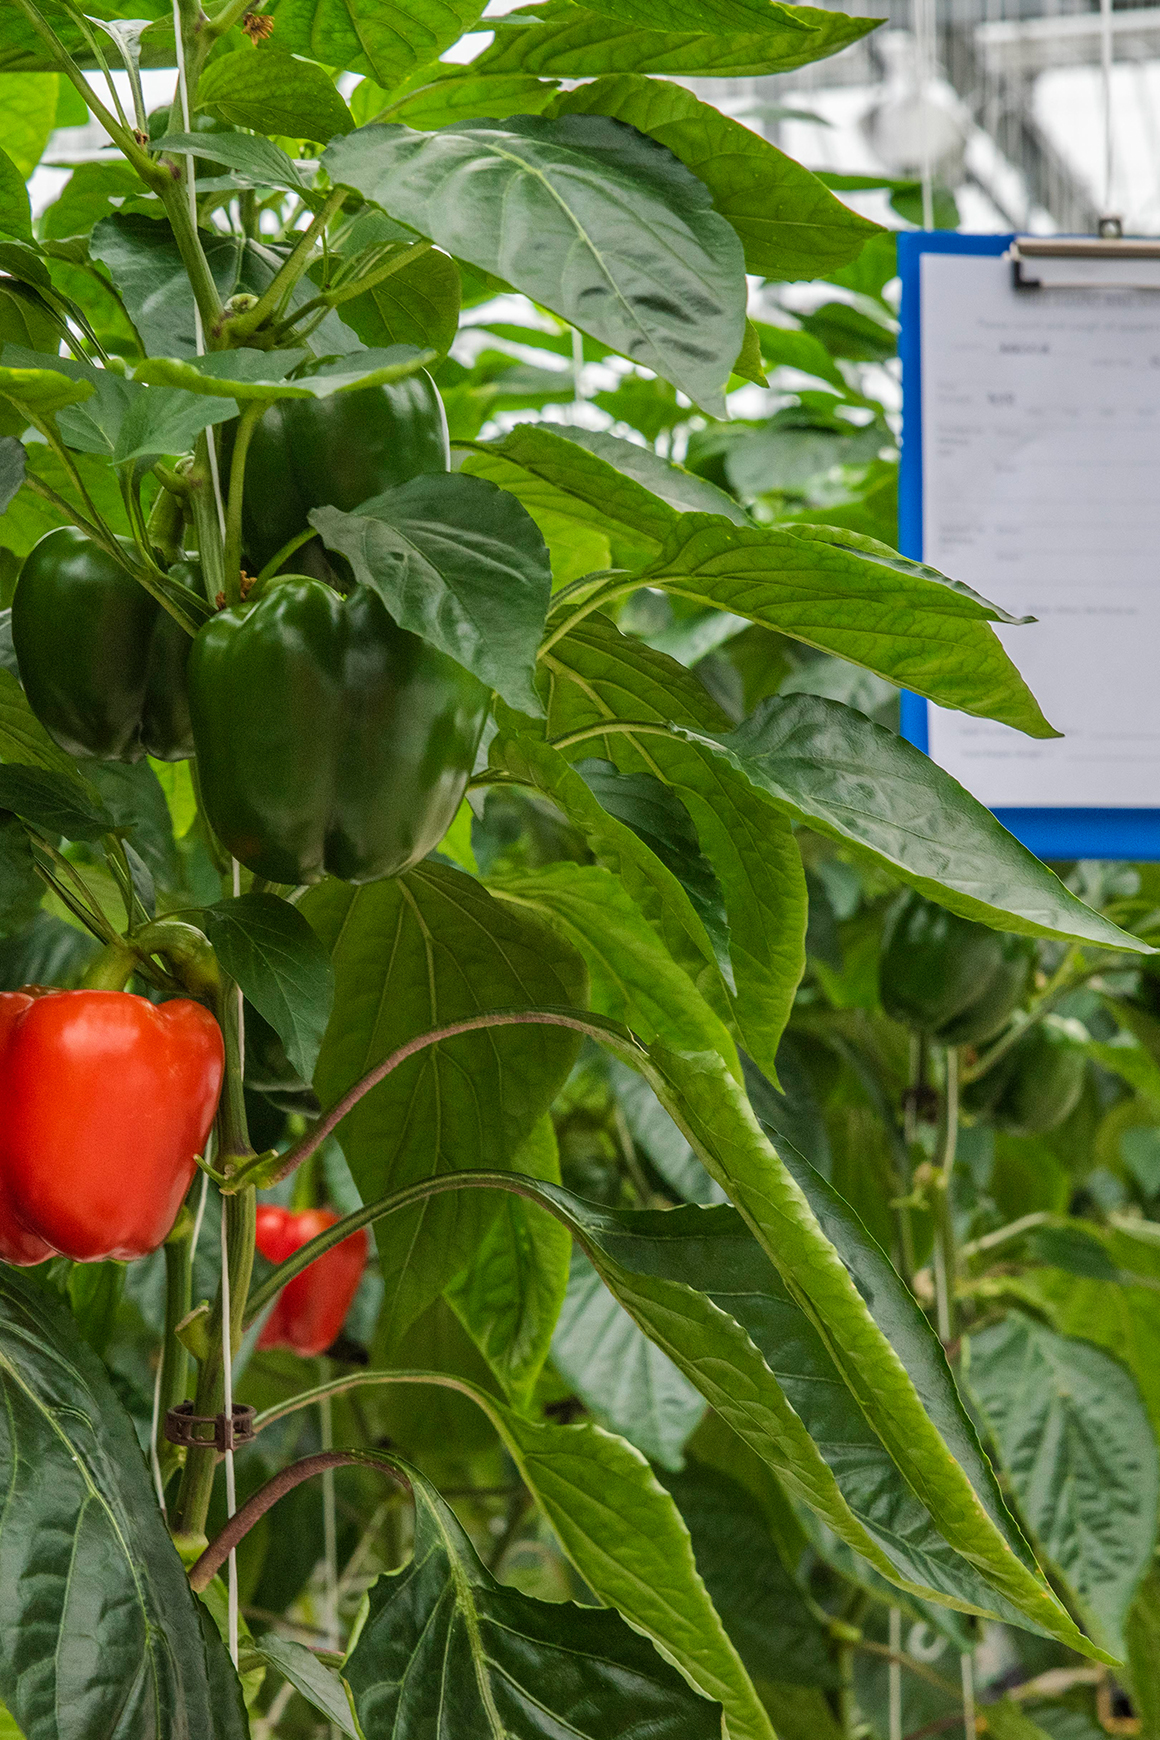 An example of new pepper trials in Tangmere Airfield Nurseries' unique research facility.